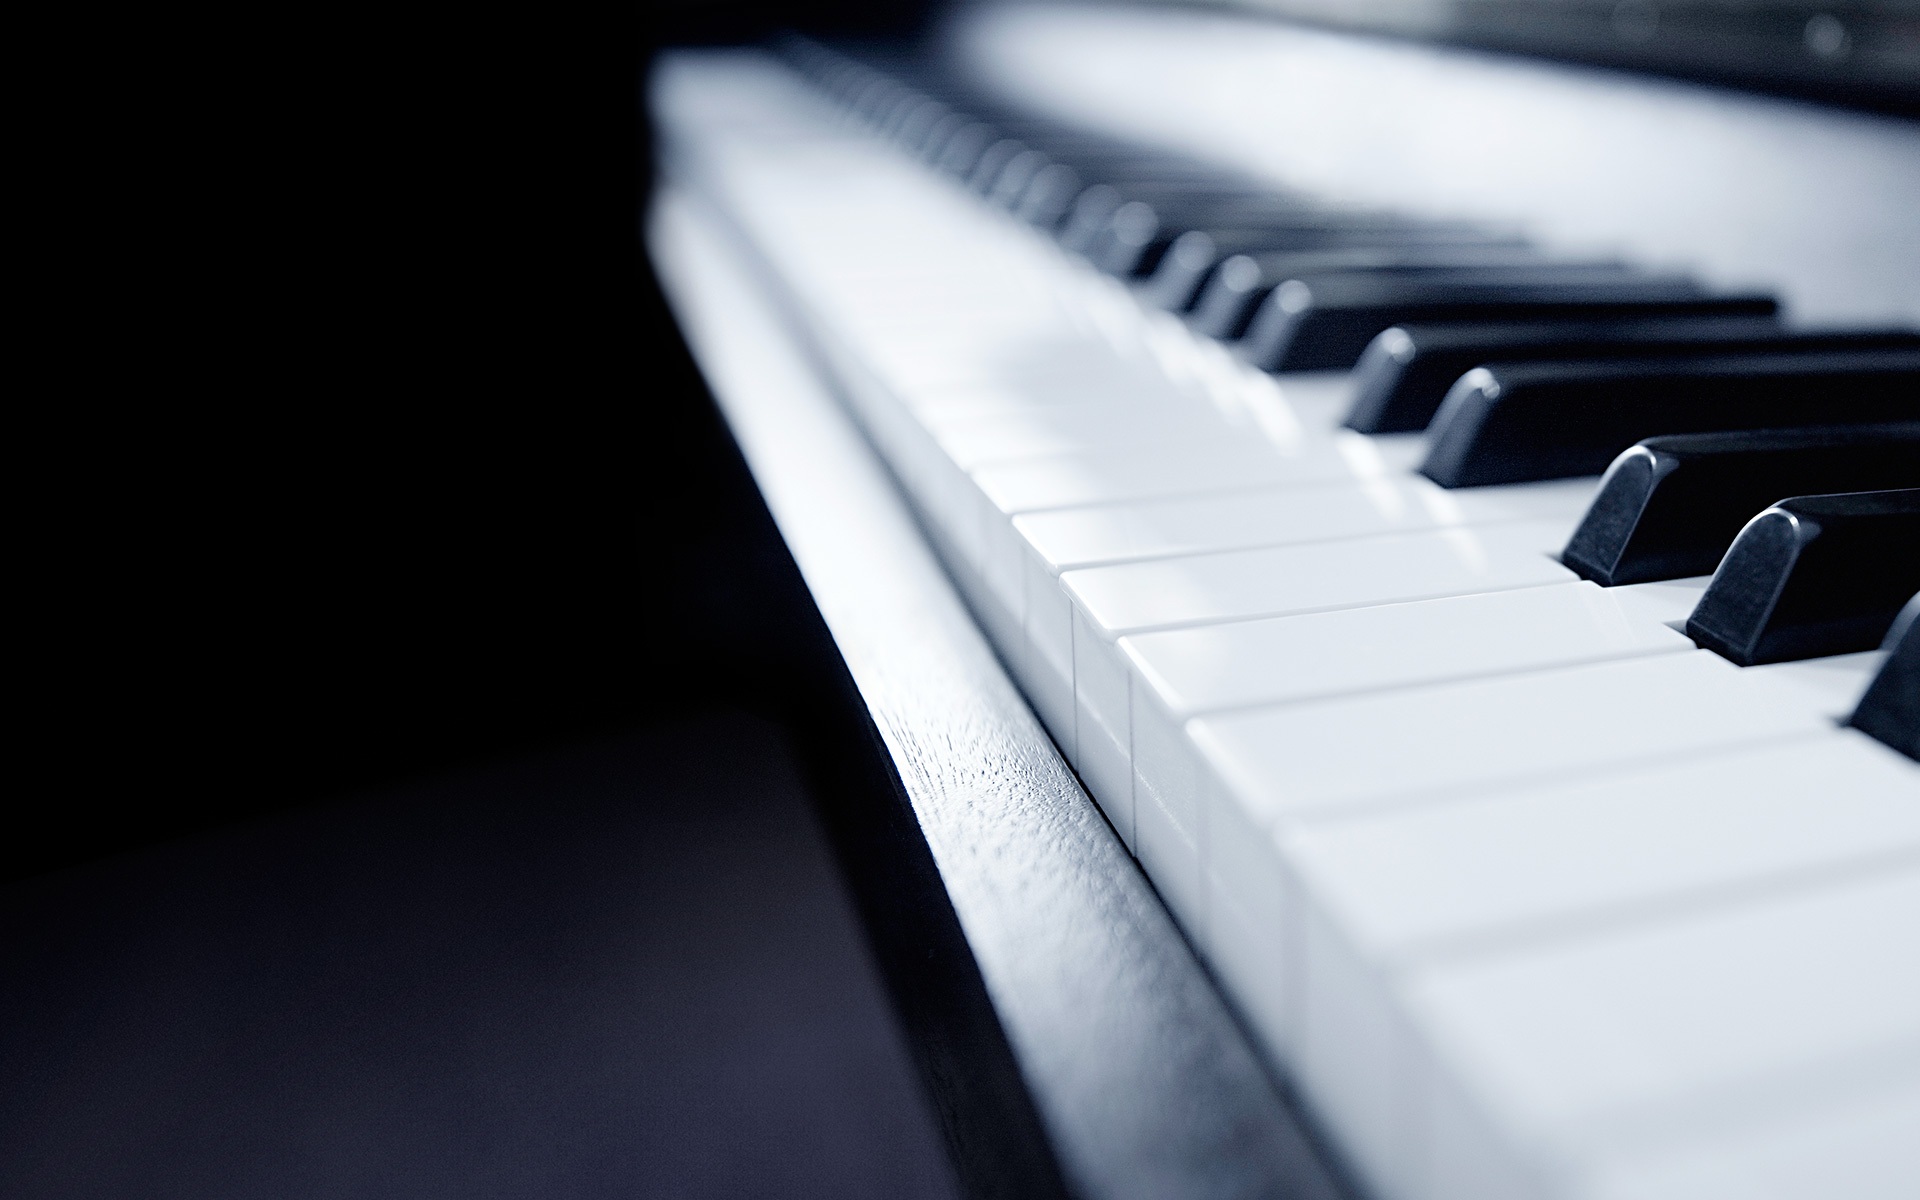 Free Images : sharp, music, blur, black and white, technology ...